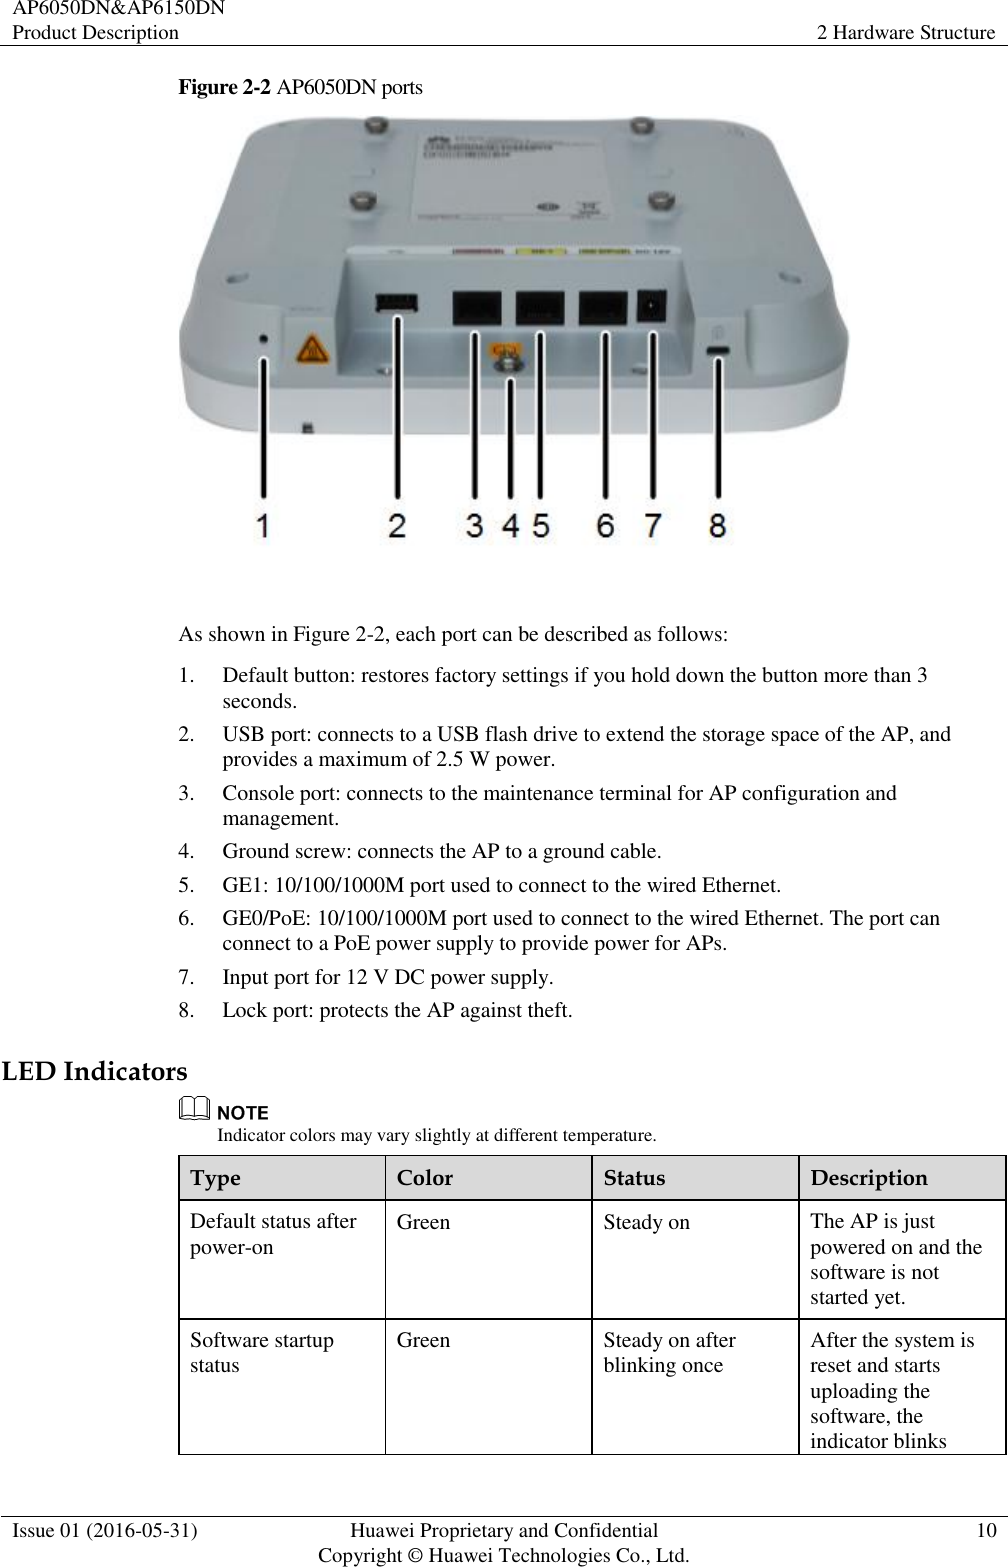 AP6050DN&amp;AP6150DN Product Description 2 Hardware Structure  Issue 01 (2016-05-31) Huawei Proprietary and Confidential                                     Copyright © Huawei Technologies Co., Ltd. 10  Figure 2-2 AP6050DN ports   As shown in Figure 2-2, each port can be described as follows: 1. Default button: restores factory settings if you hold down the button more than 3 seconds. 2. USB port: connects to a USB flash drive to extend the storage space of the AP, and provides a maximum of 2.5 W power. 3. Console port: connects to the maintenance terminal for AP configuration and management. 4. Ground screw: connects the AP to a ground cable. 5. GE1: 10/100/1000M port used to connect to the wired Ethernet. 6. GE0/PoE: 10/100/1000M port used to connect to the wired Ethernet. The port can connect to a PoE power supply to provide power for APs. 7. Input port for 12 V DC power supply. 8. Lock port: protects the AP against theft. LED Indicators  Indicator colors may vary slightly at different temperature. Type Color Status Description Default status after power-on Green Steady on The AP is just powered on and the software is not started yet. Software startup status Green Steady on after blinking once After the system is reset and starts uploading the software, the indicator blinks 